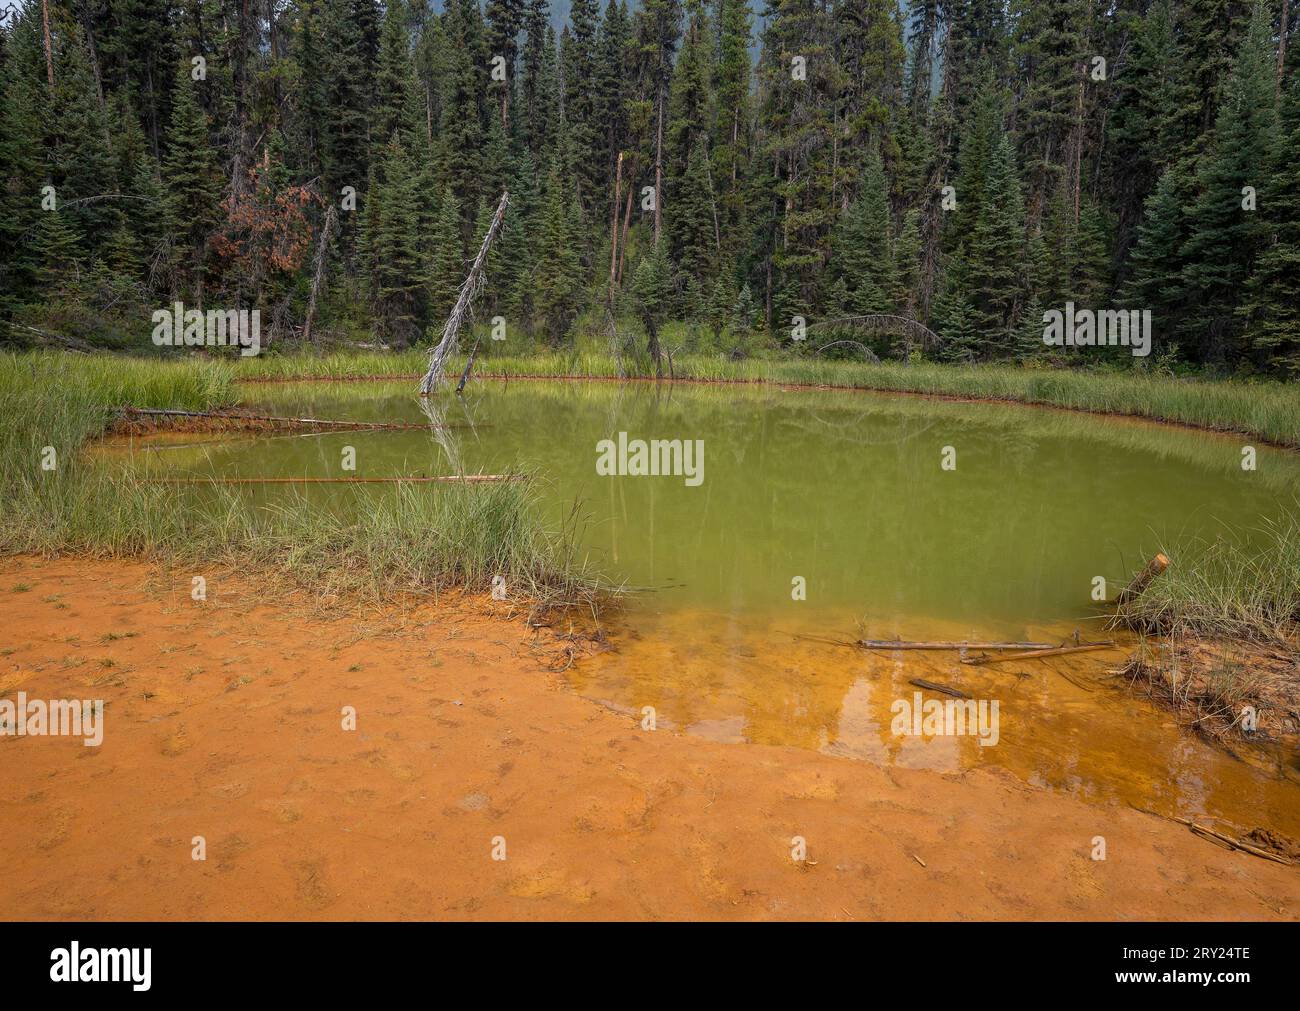 Green pond at the site of a former ochre mine in Kootenay National Park, British Columbia, Canada Stock Photo